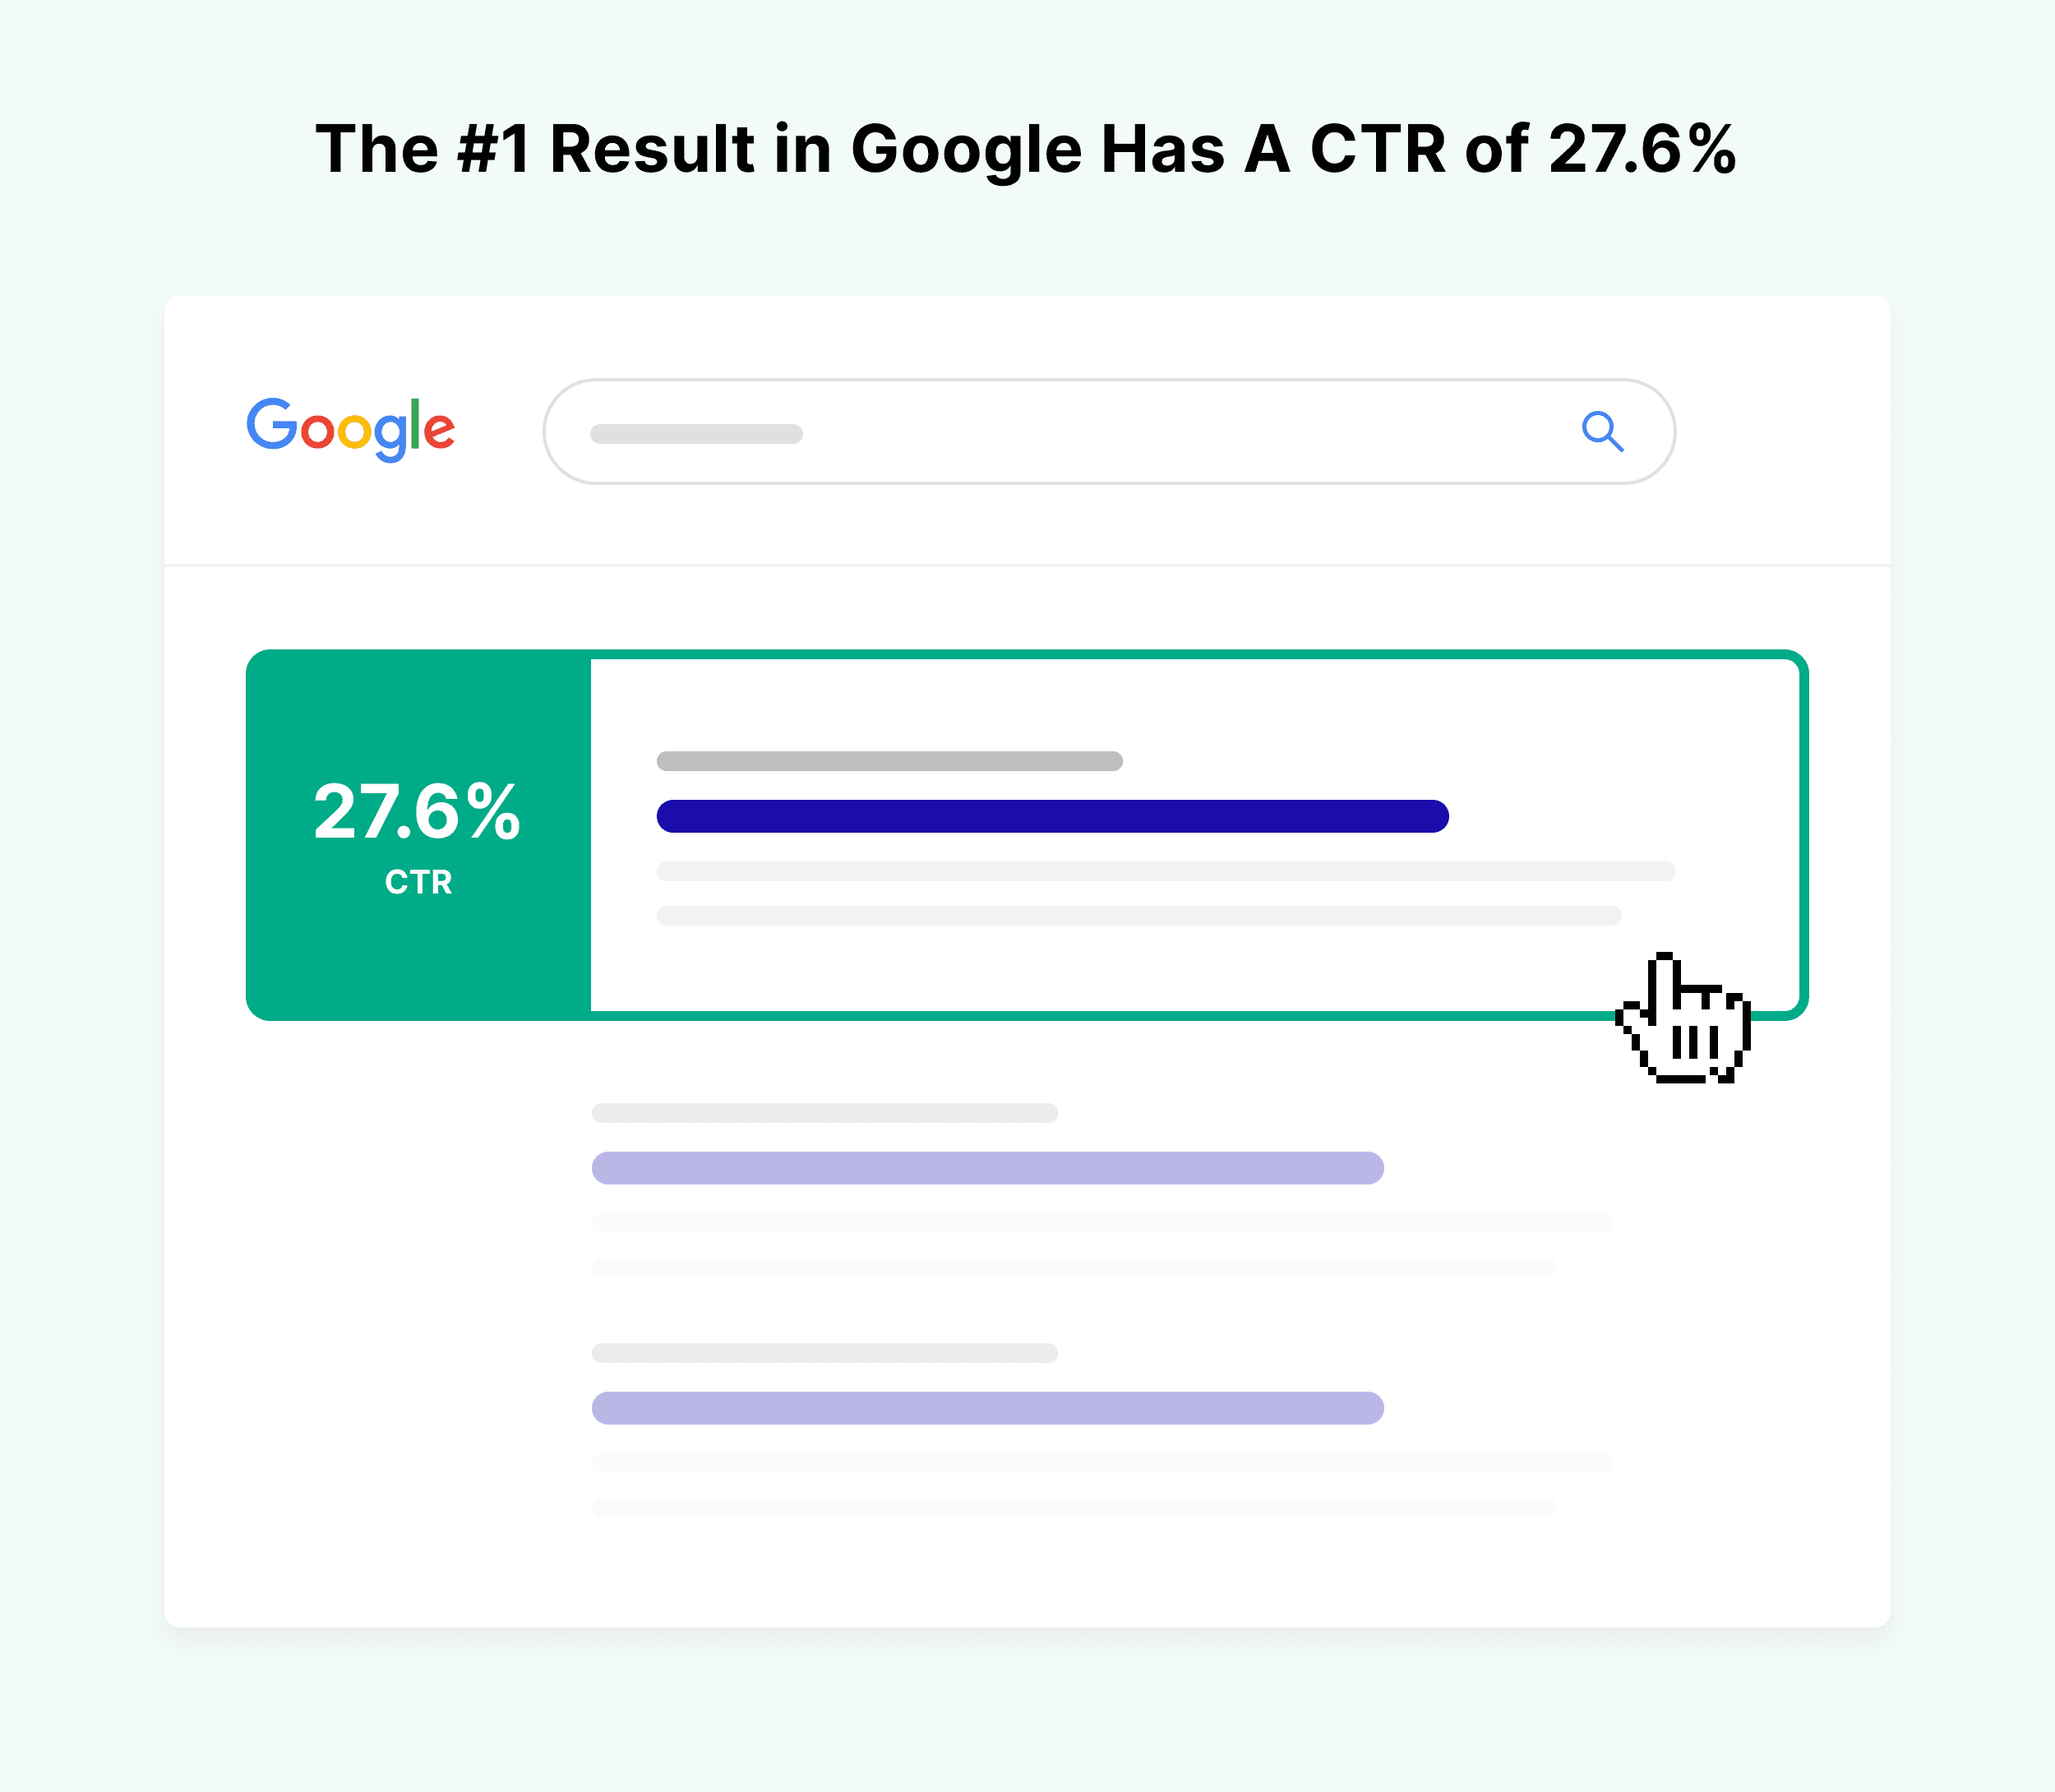 The first result in Google has a CTR of 27.6%